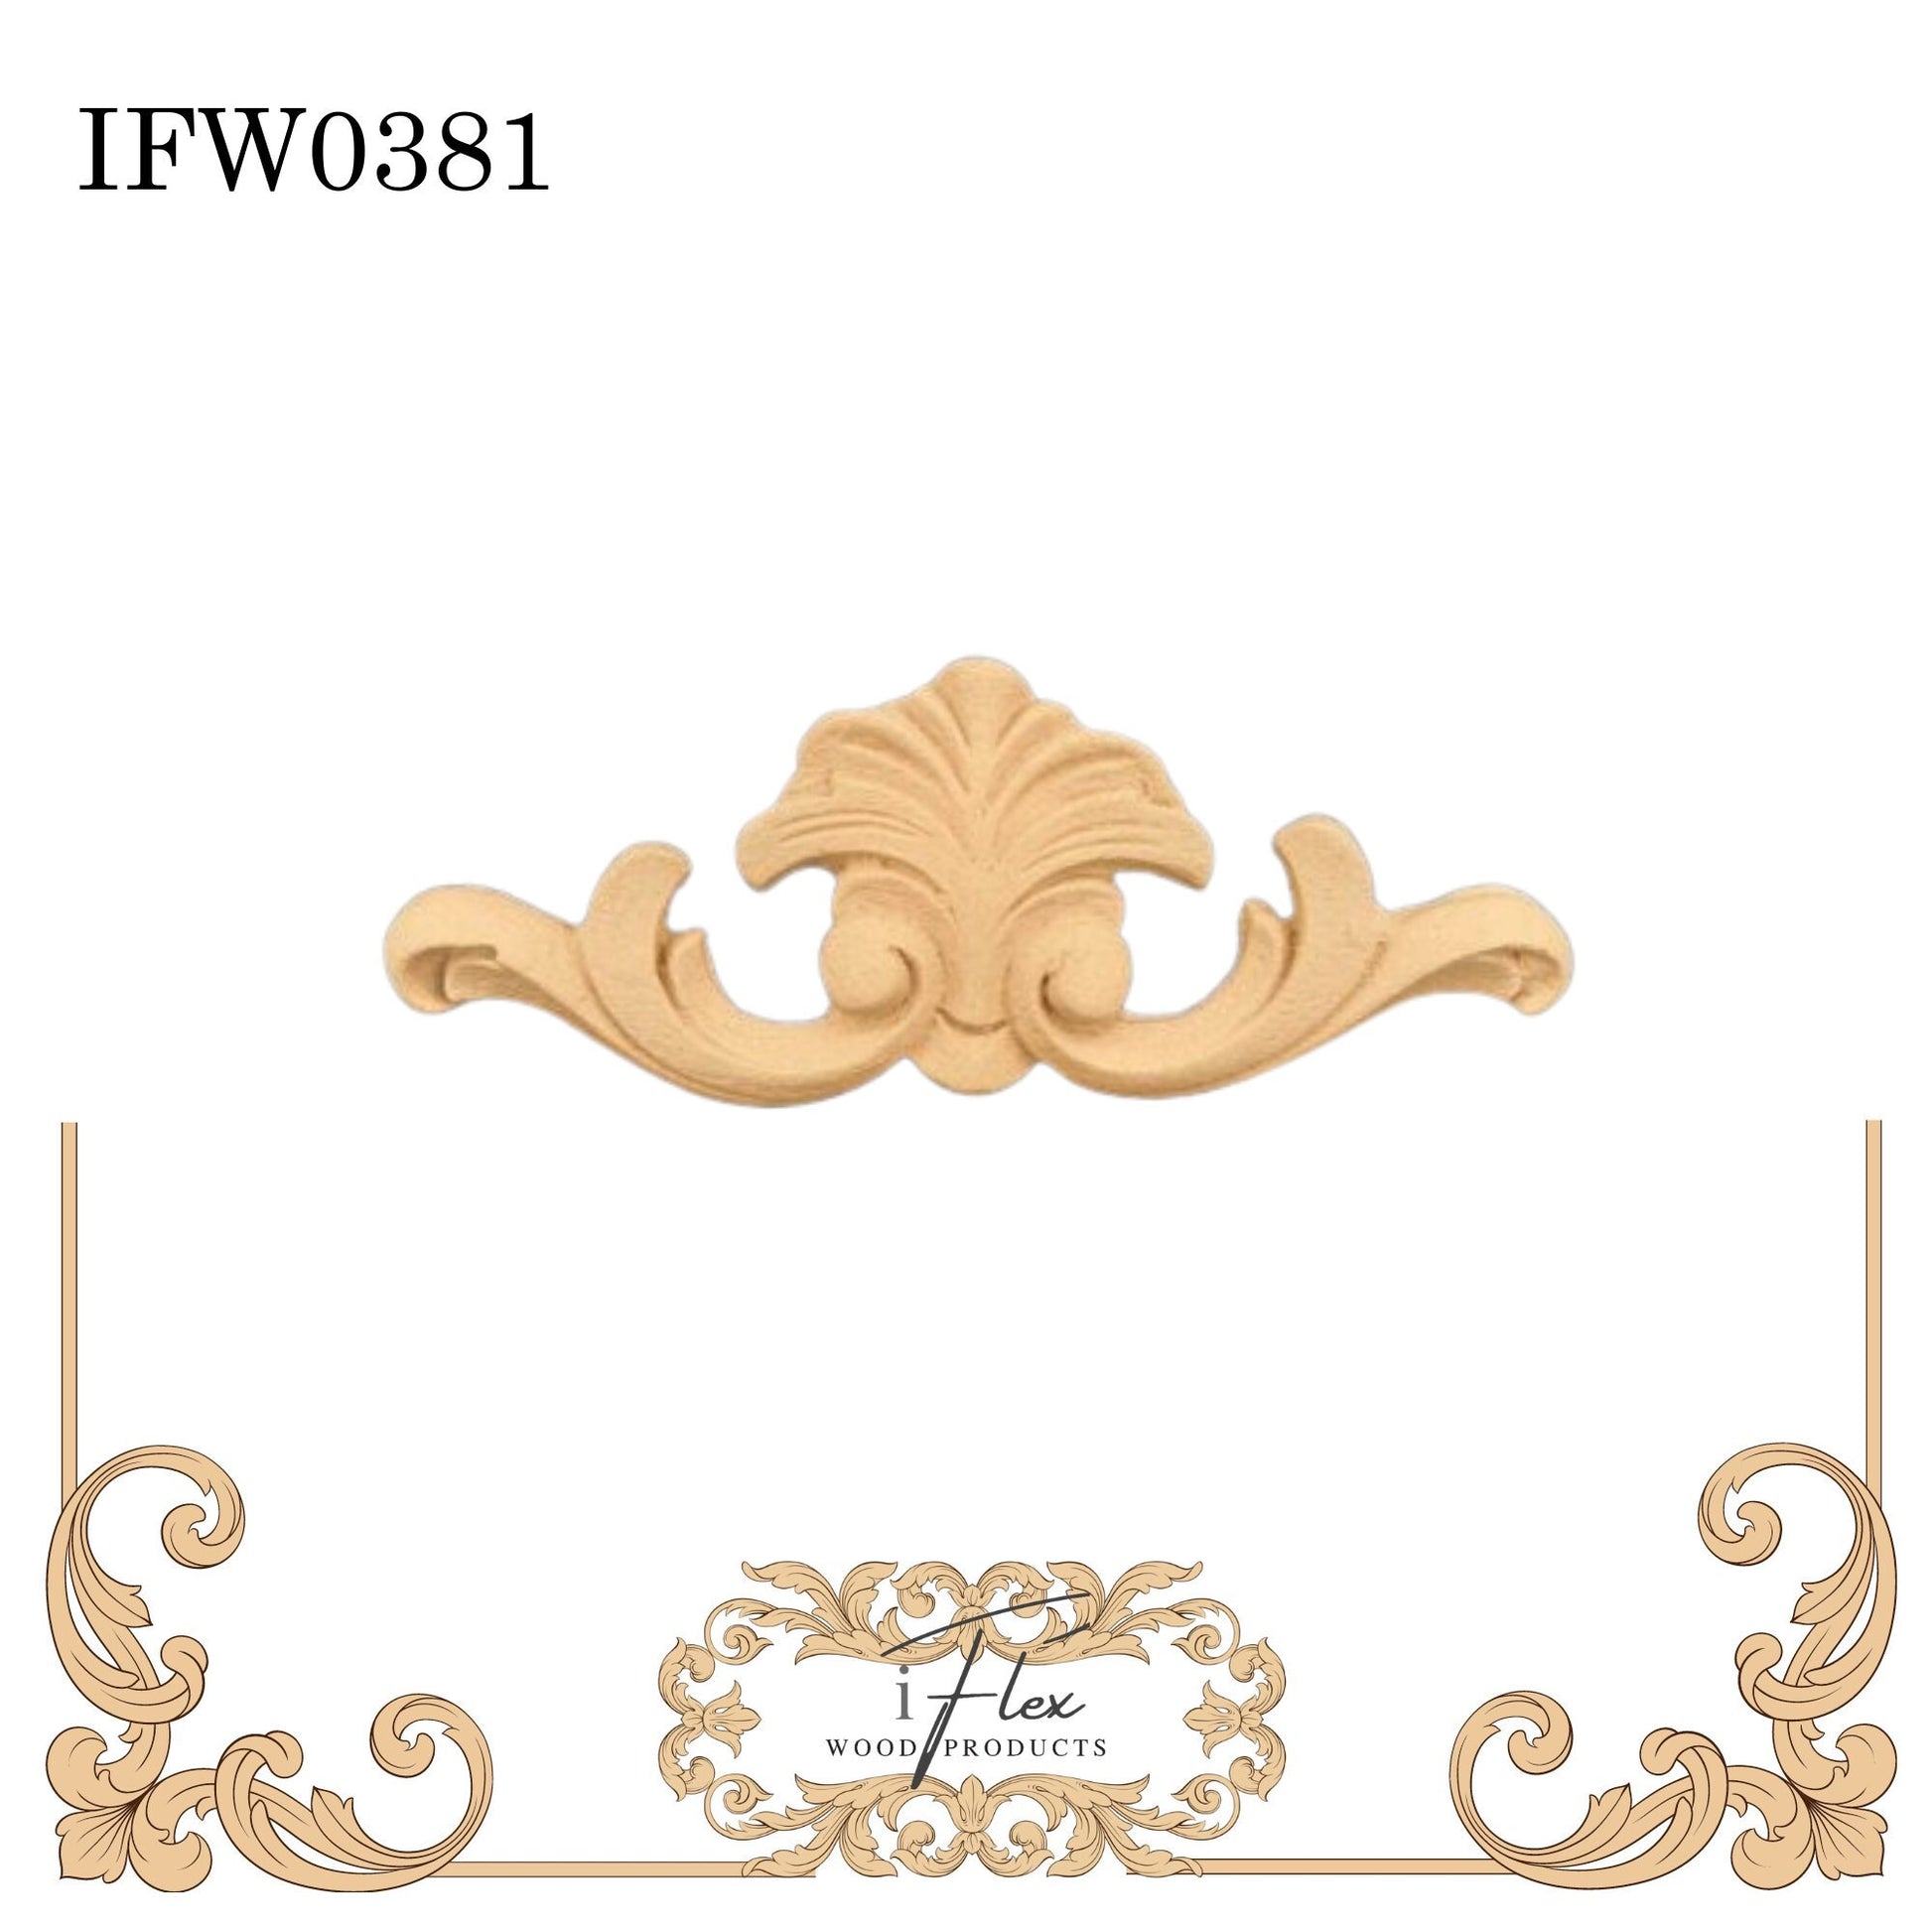 IFW 0381  iFlex Wood Products Plume bendable mouldings, flexible, wooden appliques